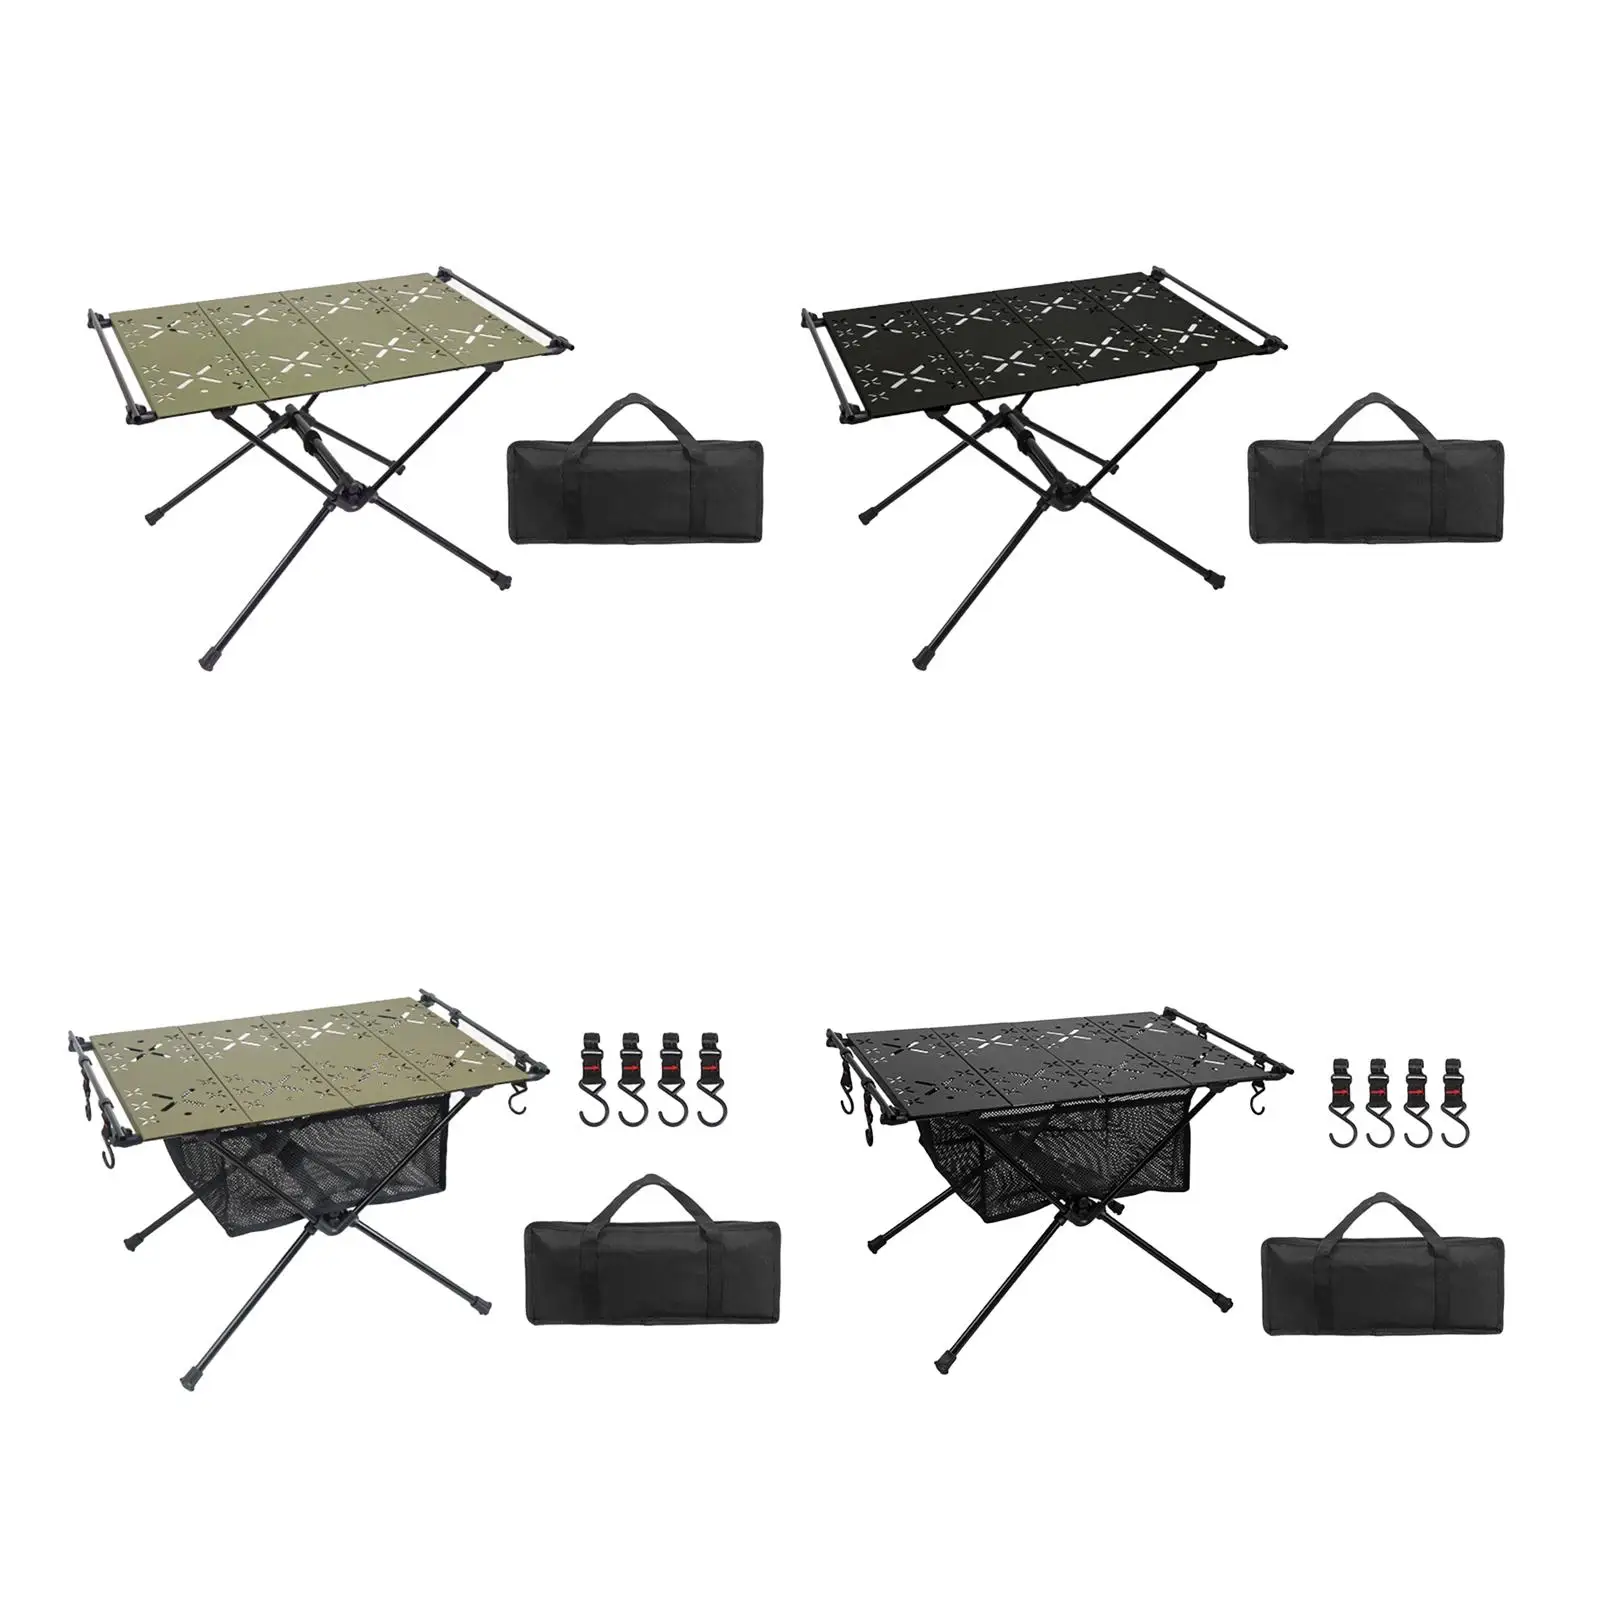 Foldable Camping Table Furniture Camp Table with Carry Bag Camping Desk Outdoor Table for Yard Backyard Patio Picnic Hiking